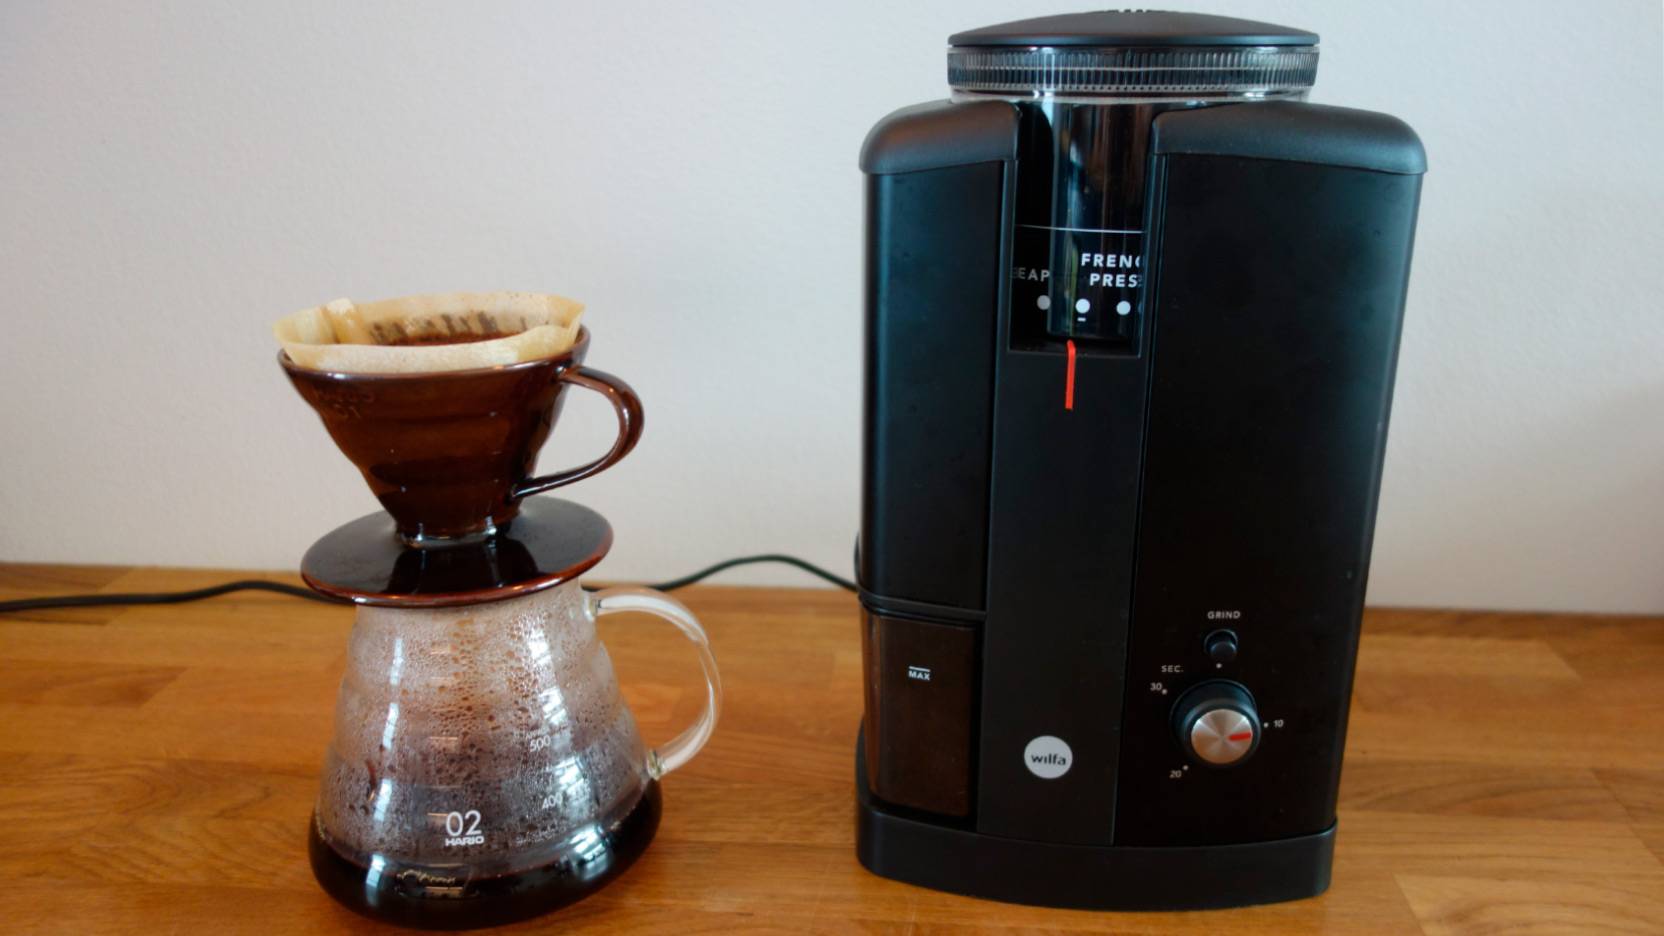 https://www.pricerunner.com/images/assets/content/bit/test/Wilfa-Svart-Classic-Aroma-used-for-drip-coffee.jpg